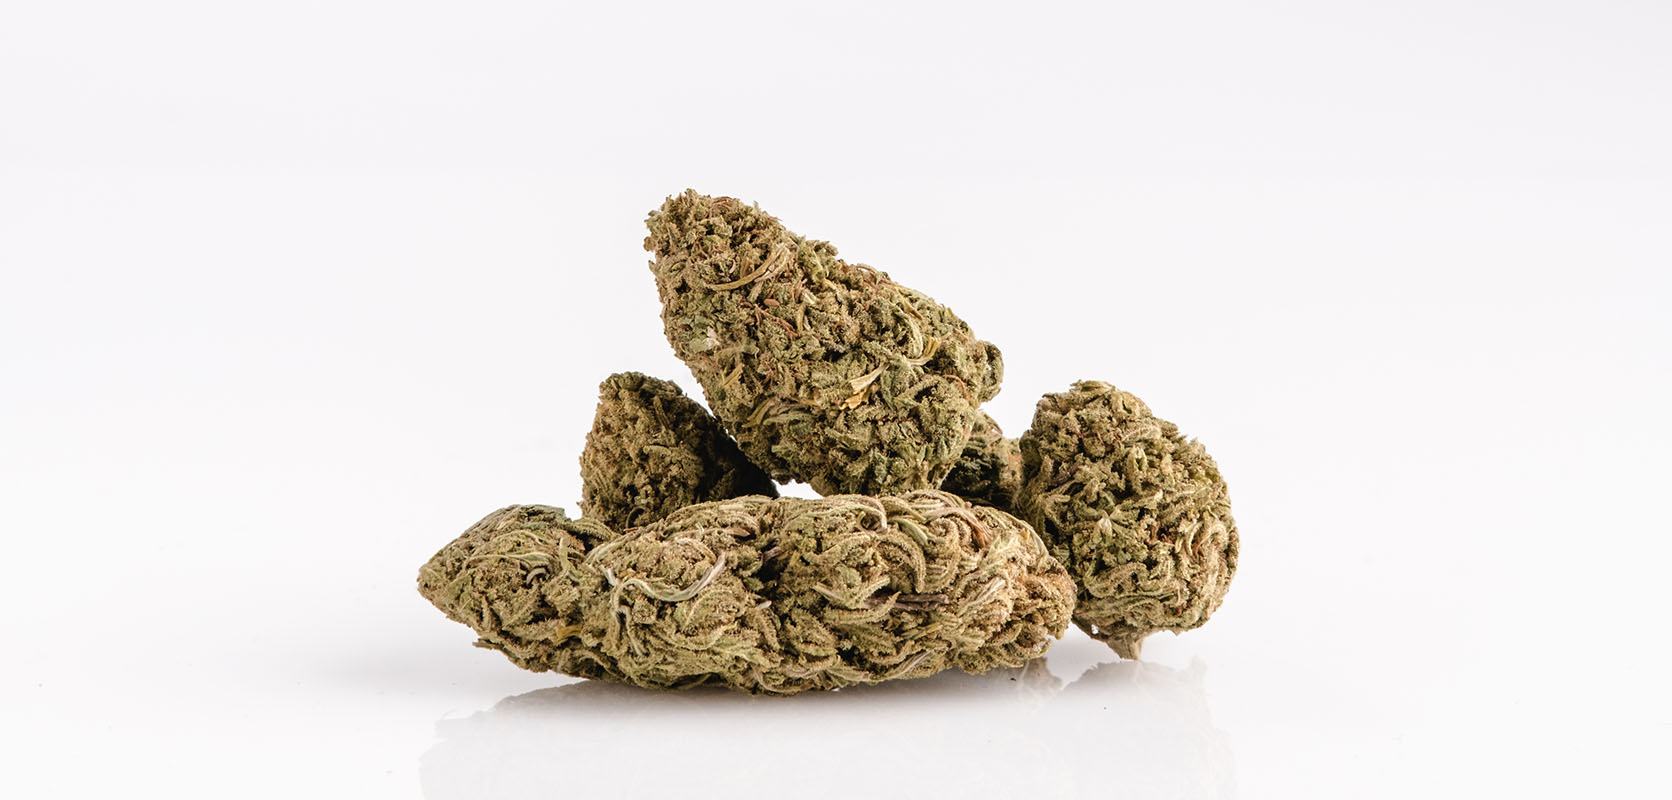 Pink Bubba strain weed buds from low price bud mail order weed online dispensary in Canada.